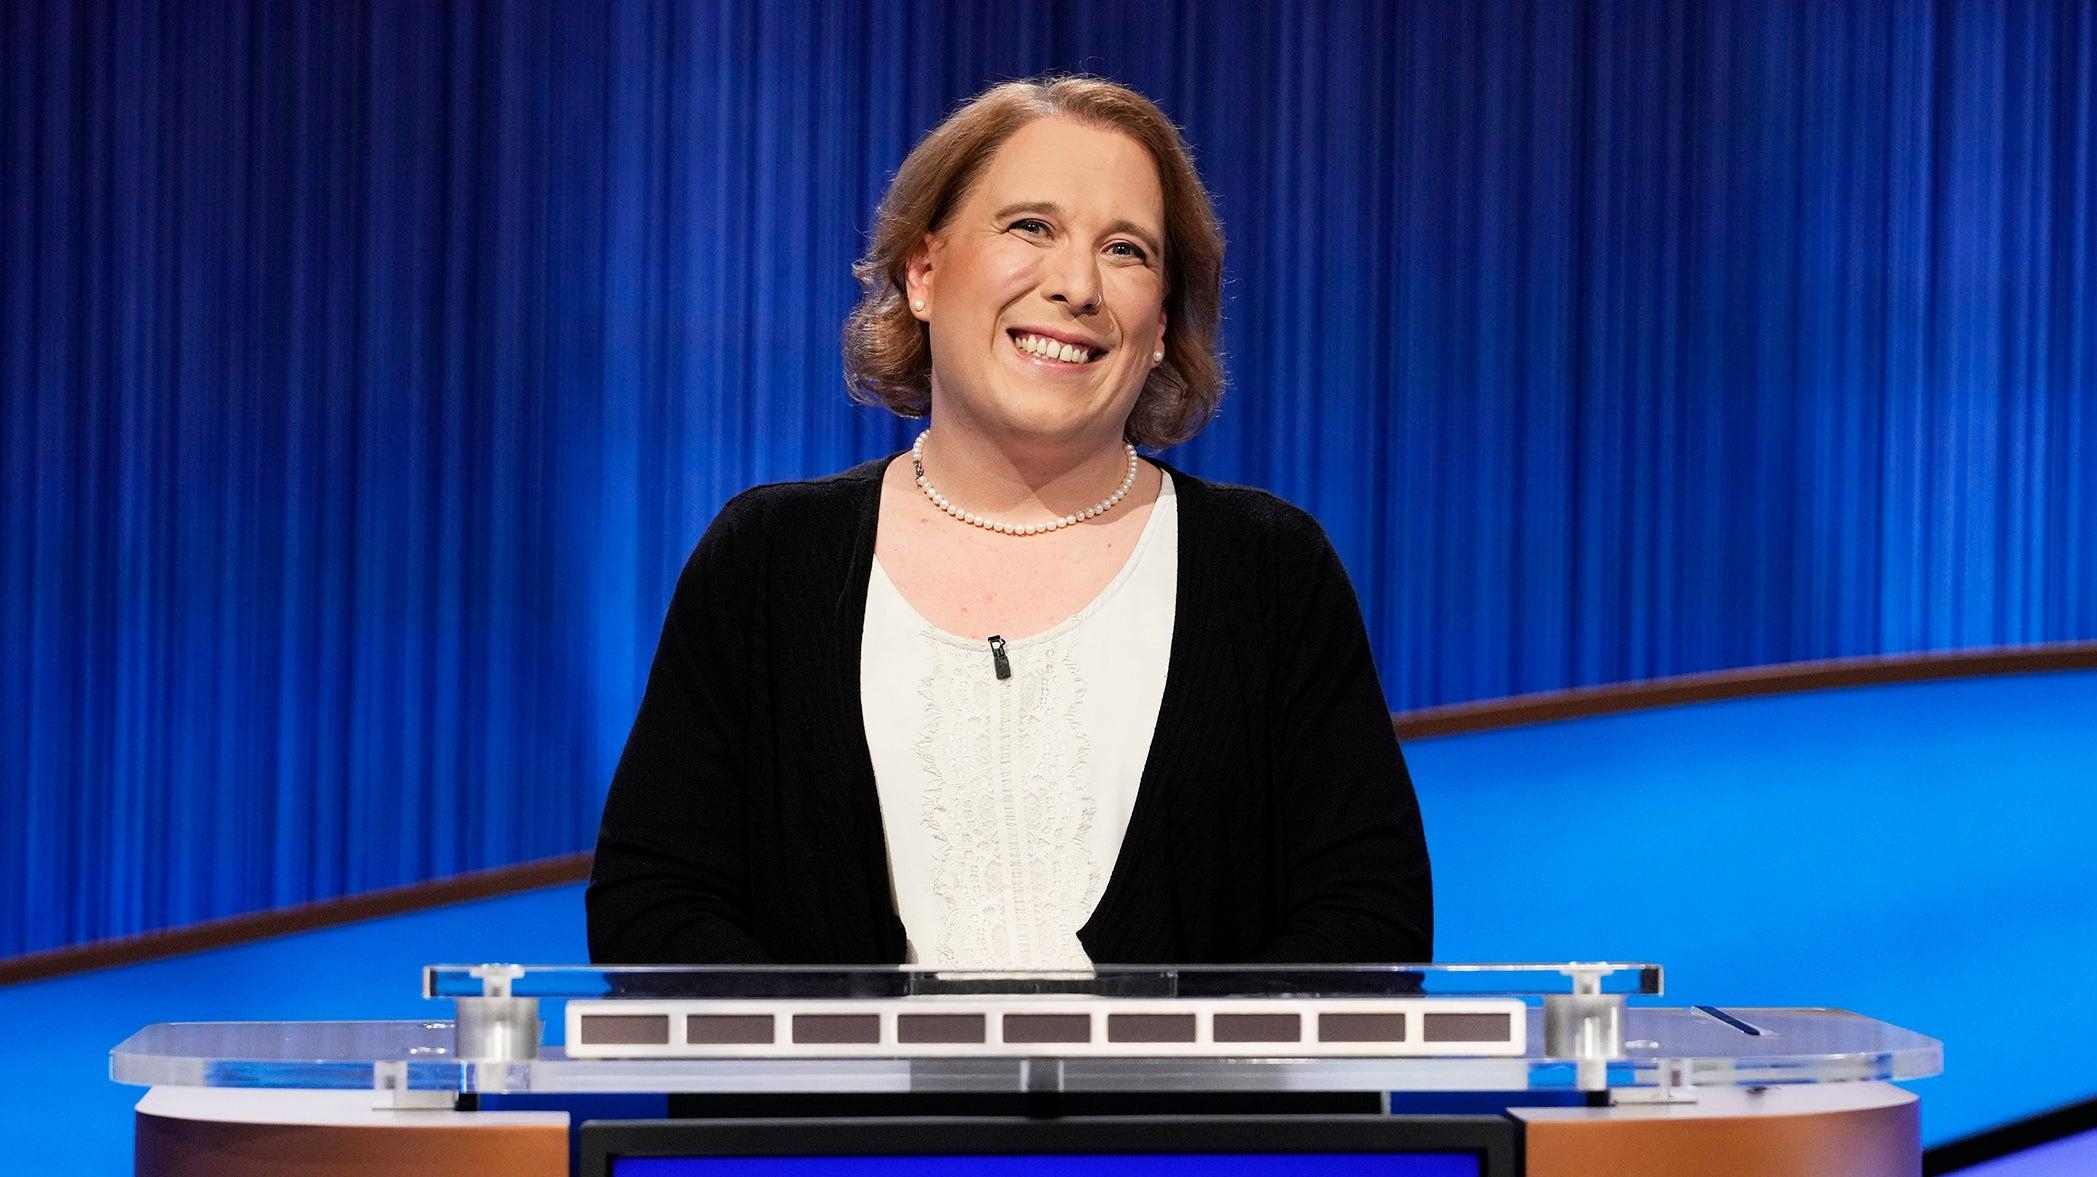 Amy Schneider’s reign ends after 40 wins on Jeopardy!